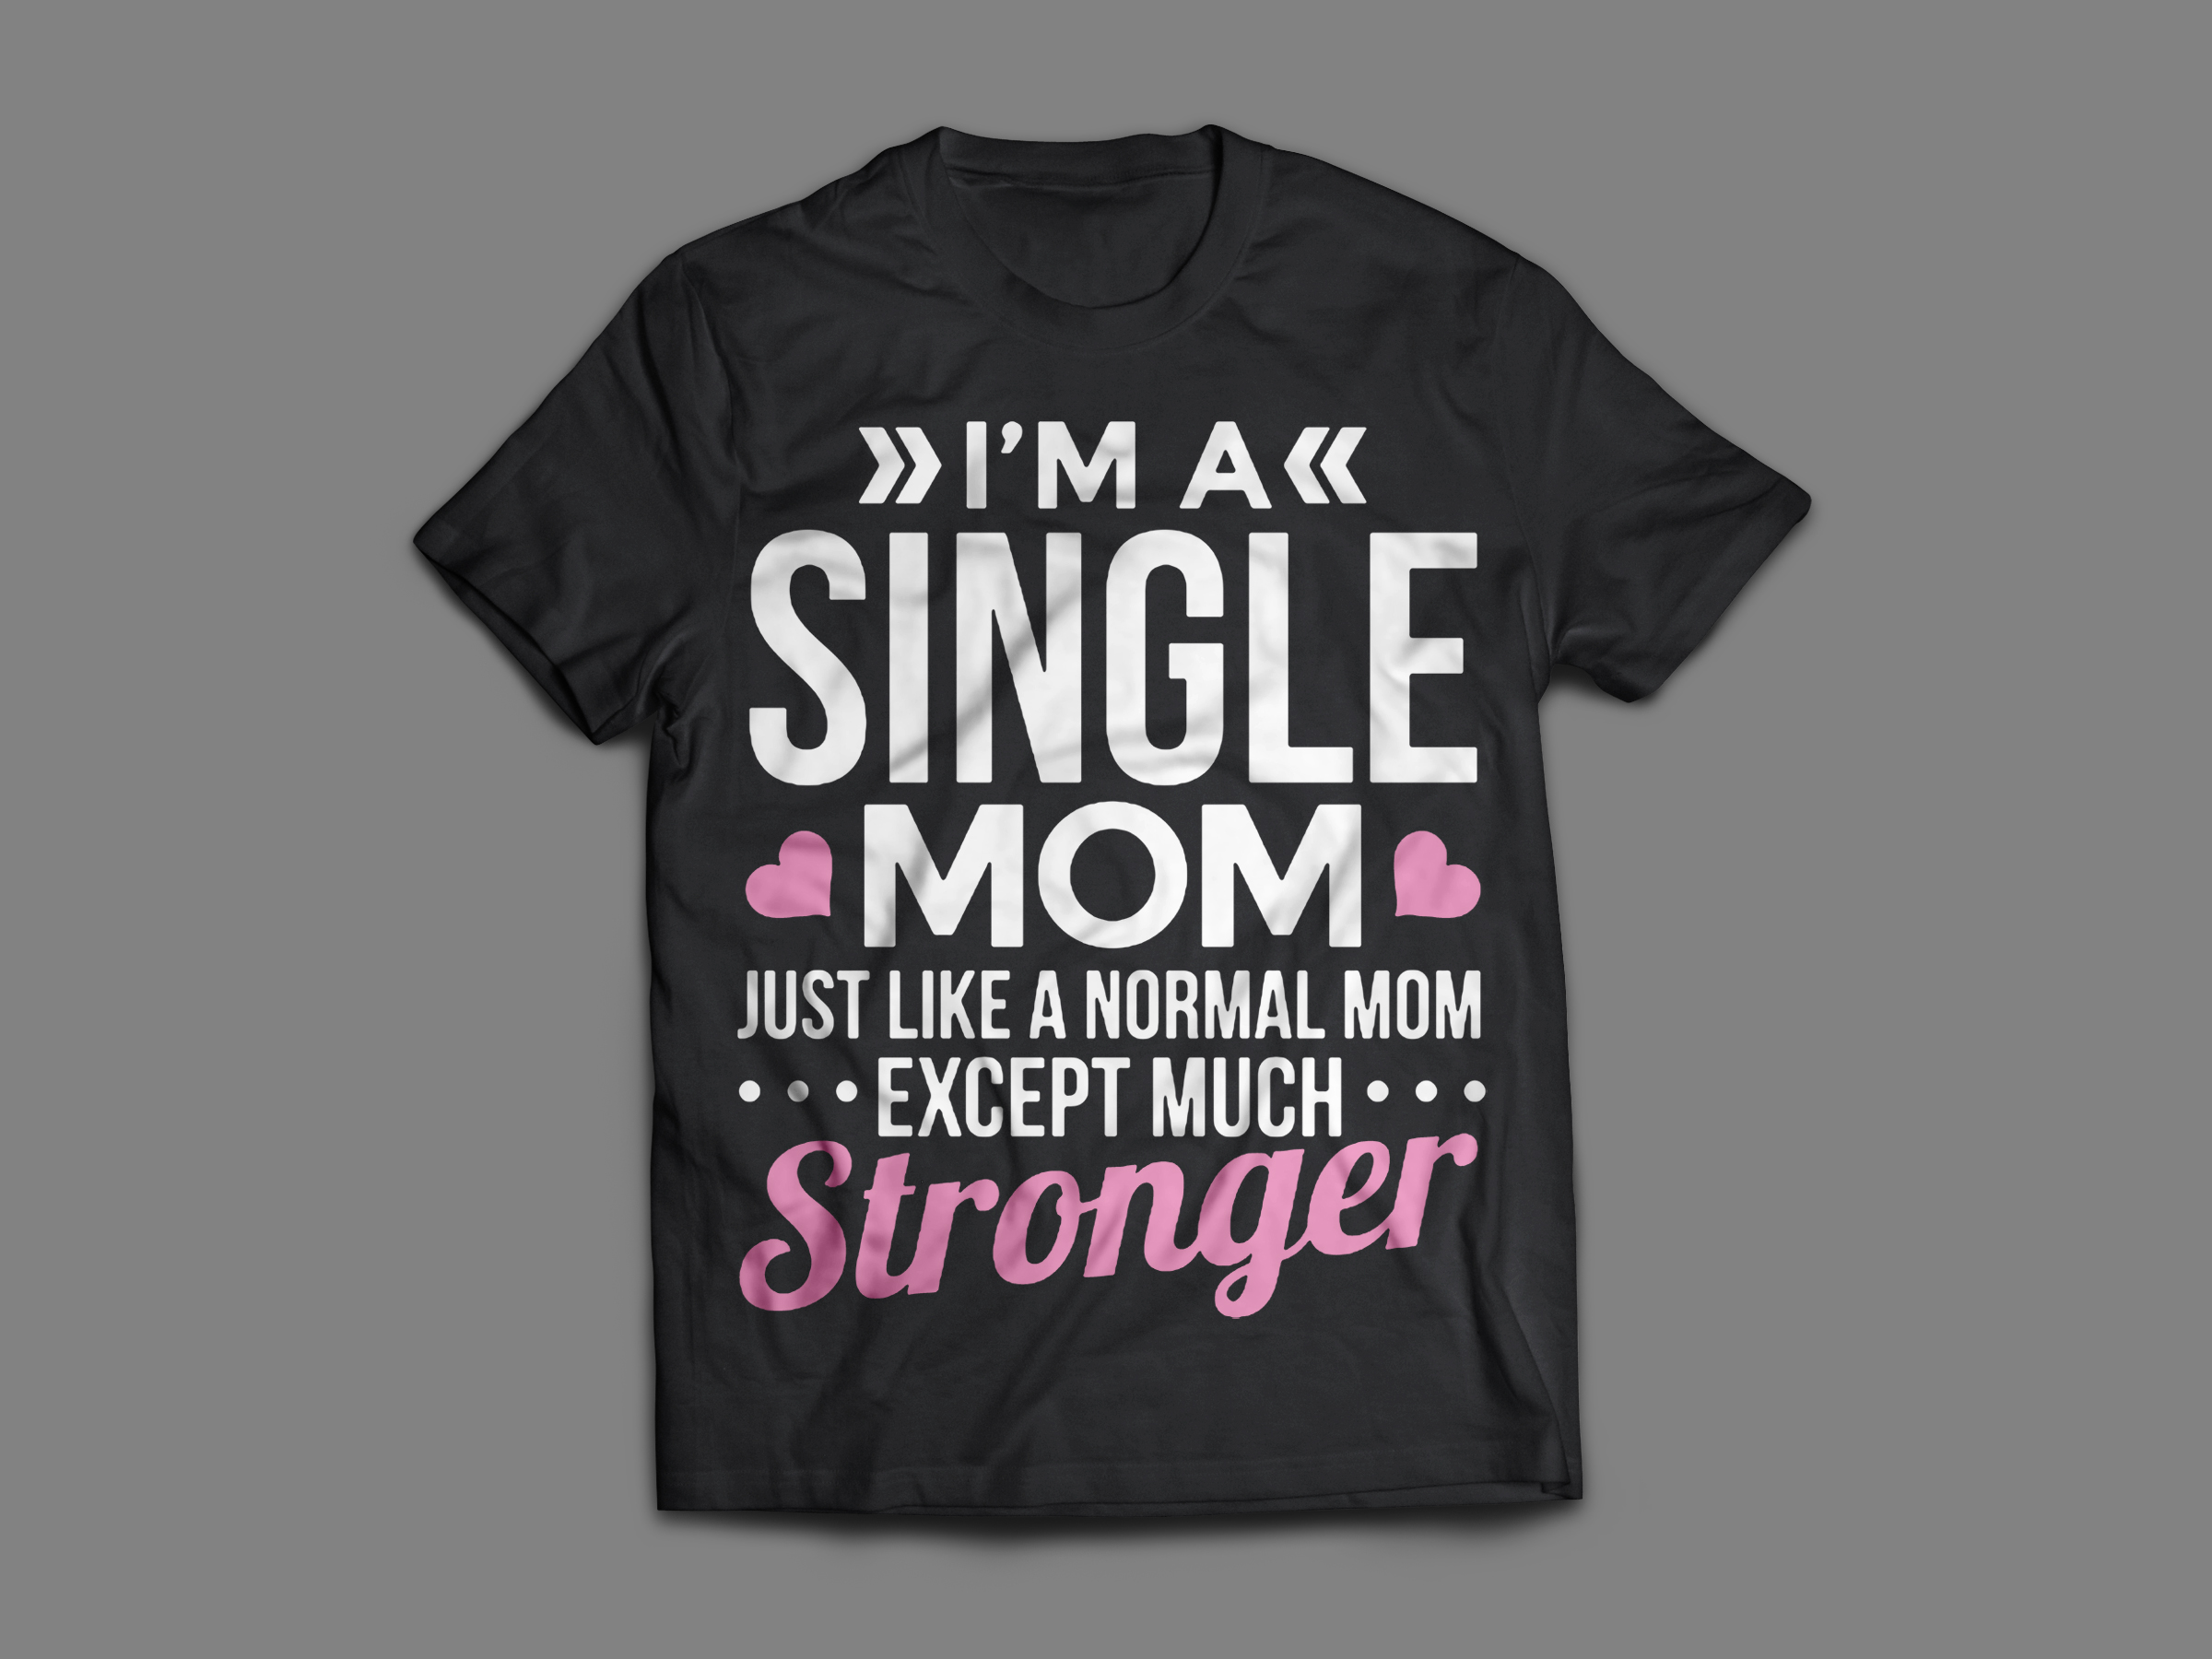 I'm A Single Mom Just Like A Normal Mom Except Much Stronger